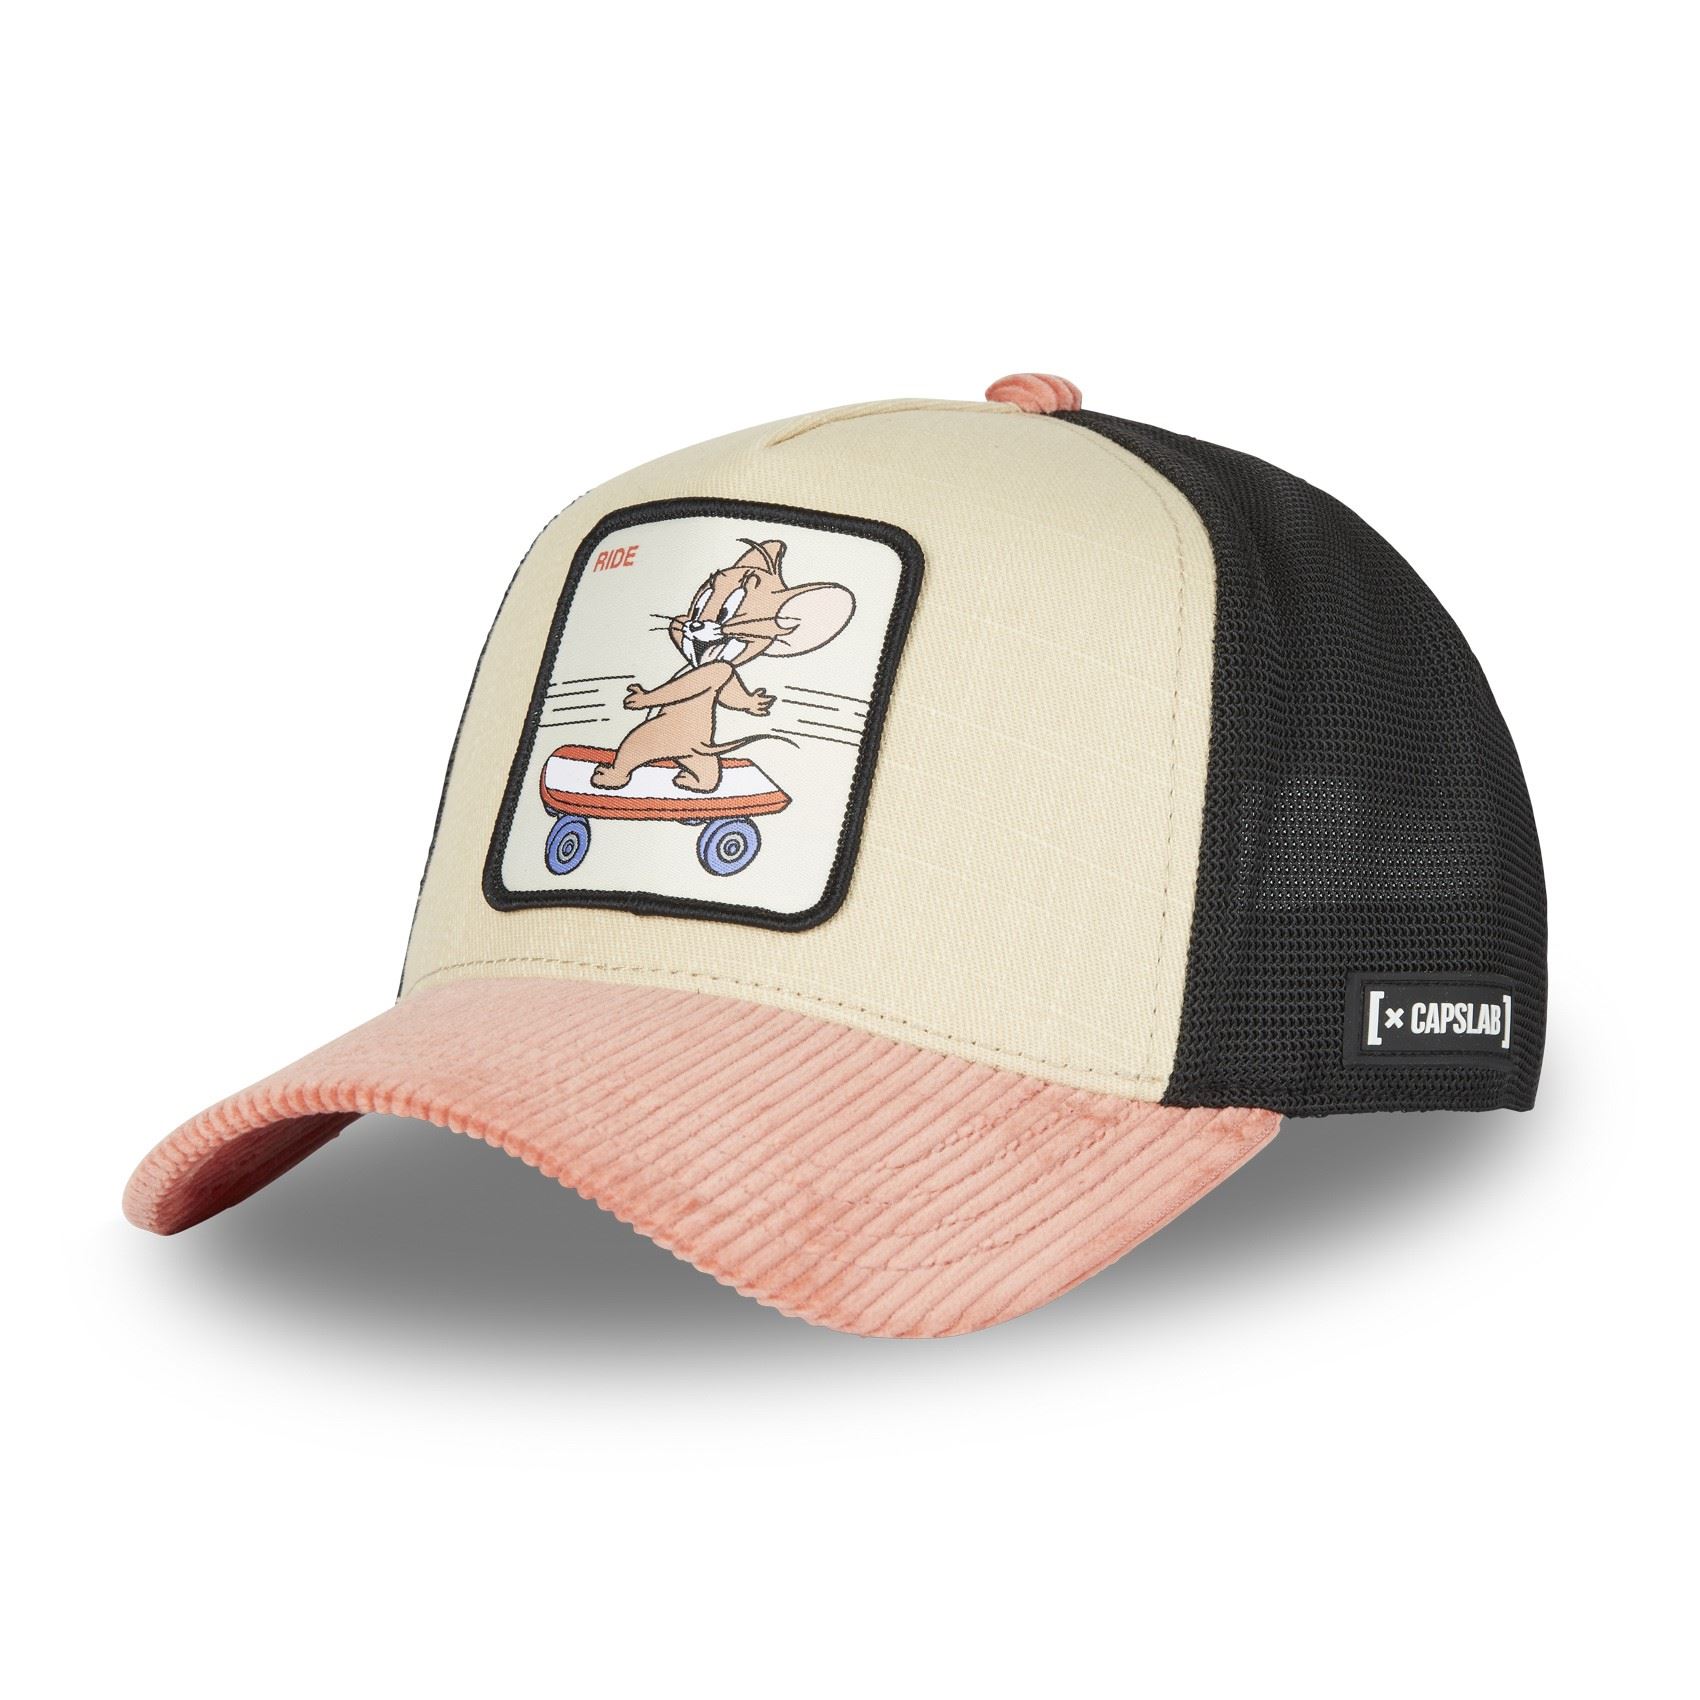 Jerry Ride Skateboard Tom and Jerry Beige Red Trucker Cap Capslab